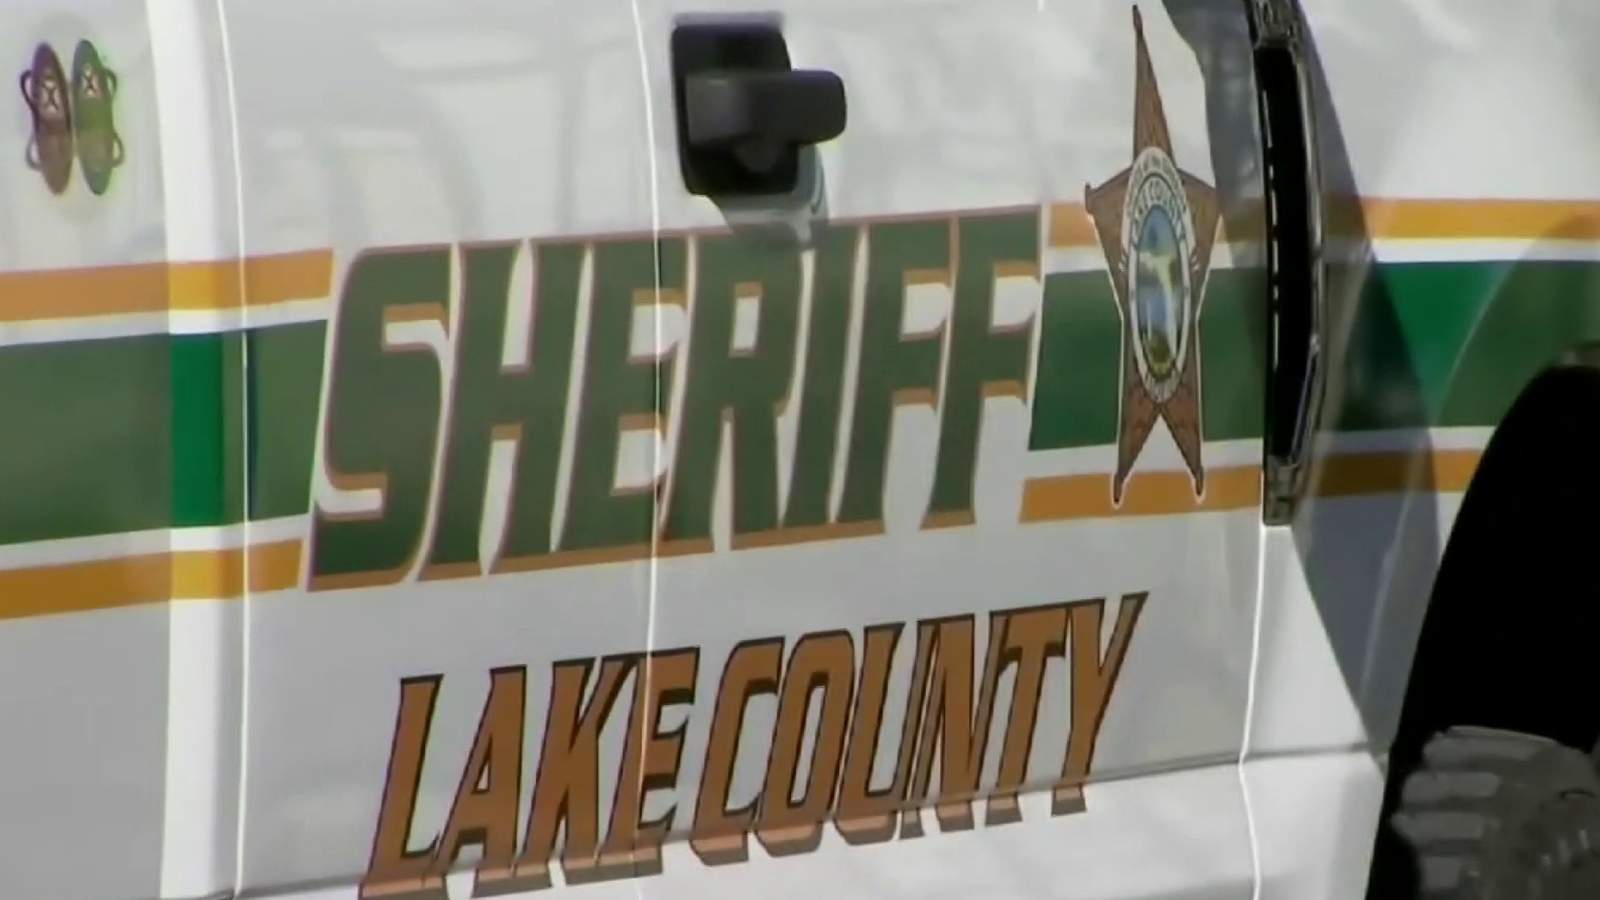 Woman and ex-boyfriend killed in murder-suicide at Lake County RV resort, deputies say